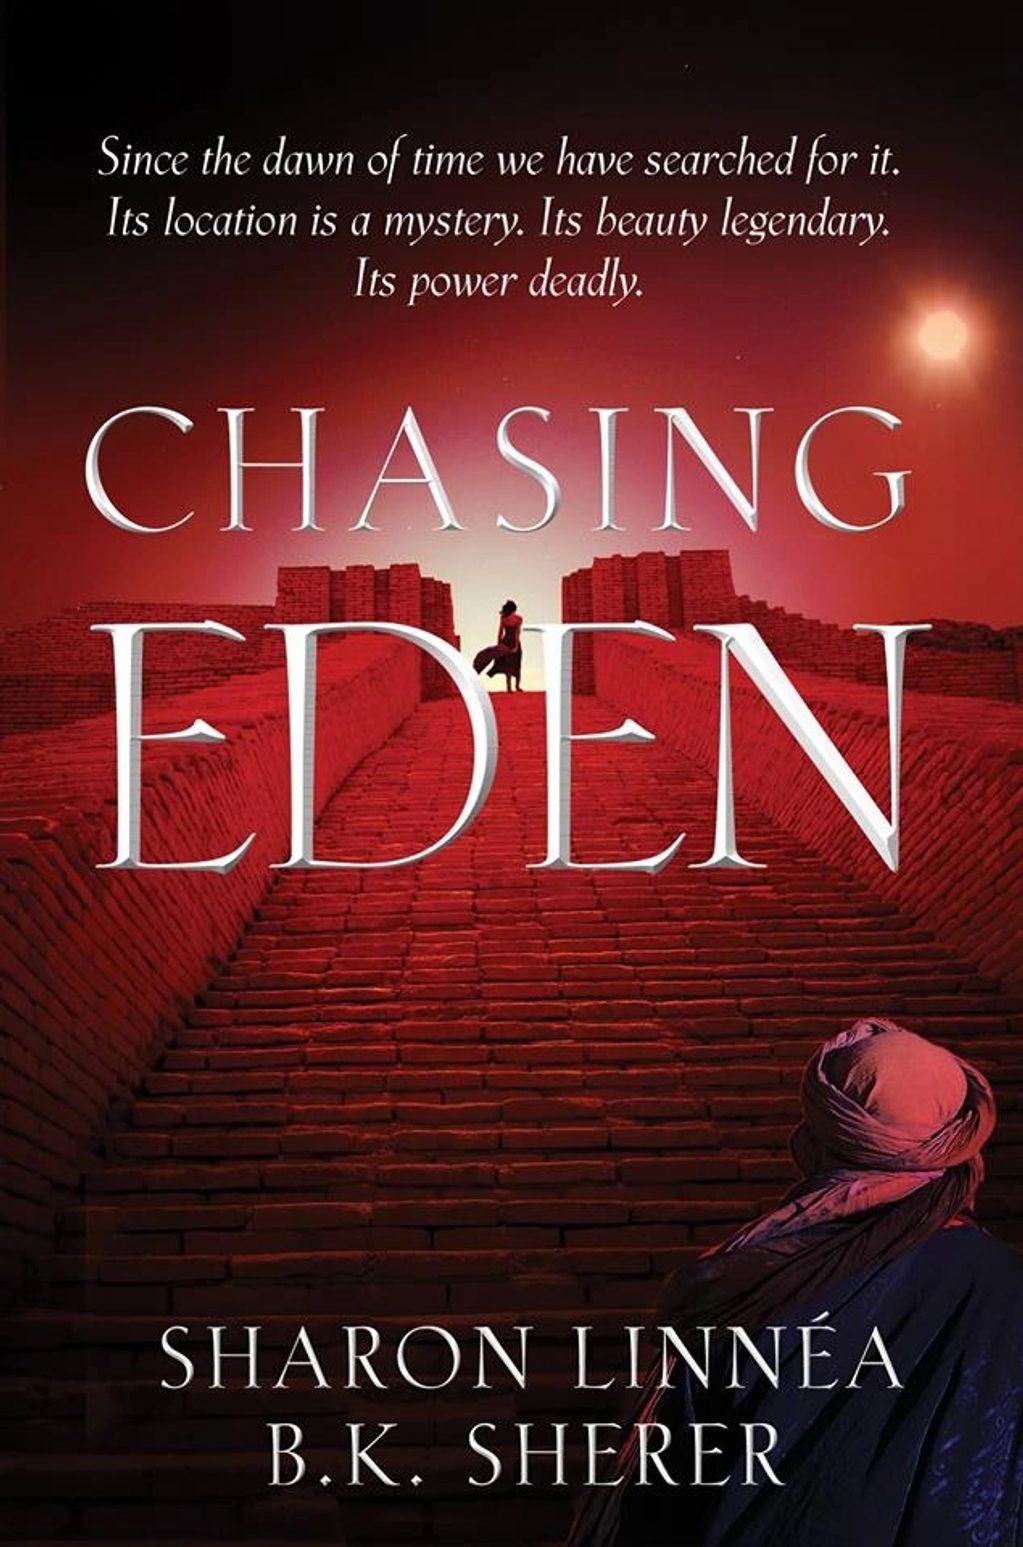  The adventures of Chaplain Jaime Richards begin in the first of the bestselling Eden thrillers! 